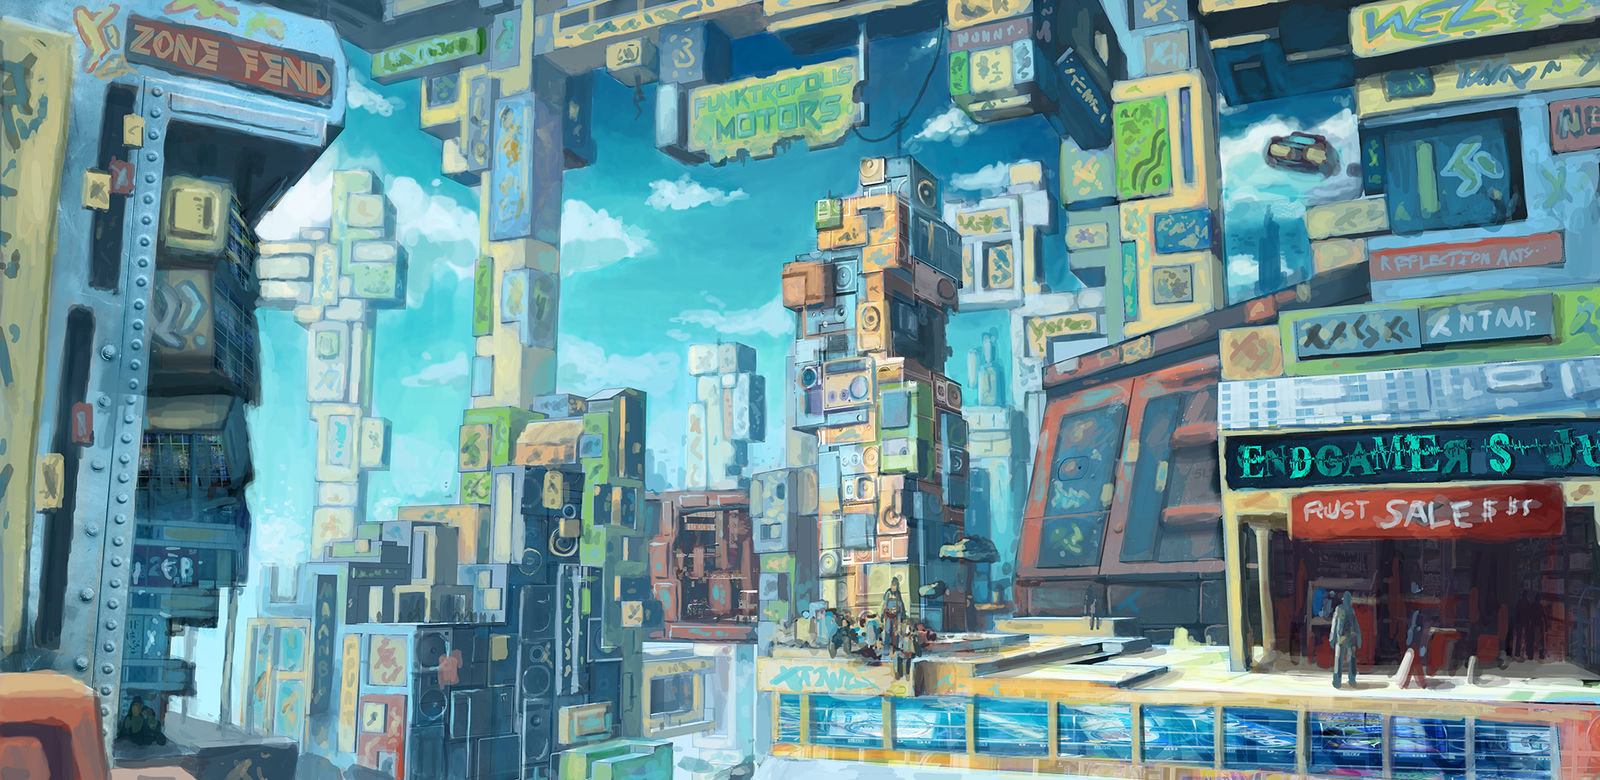 The City Of The Future